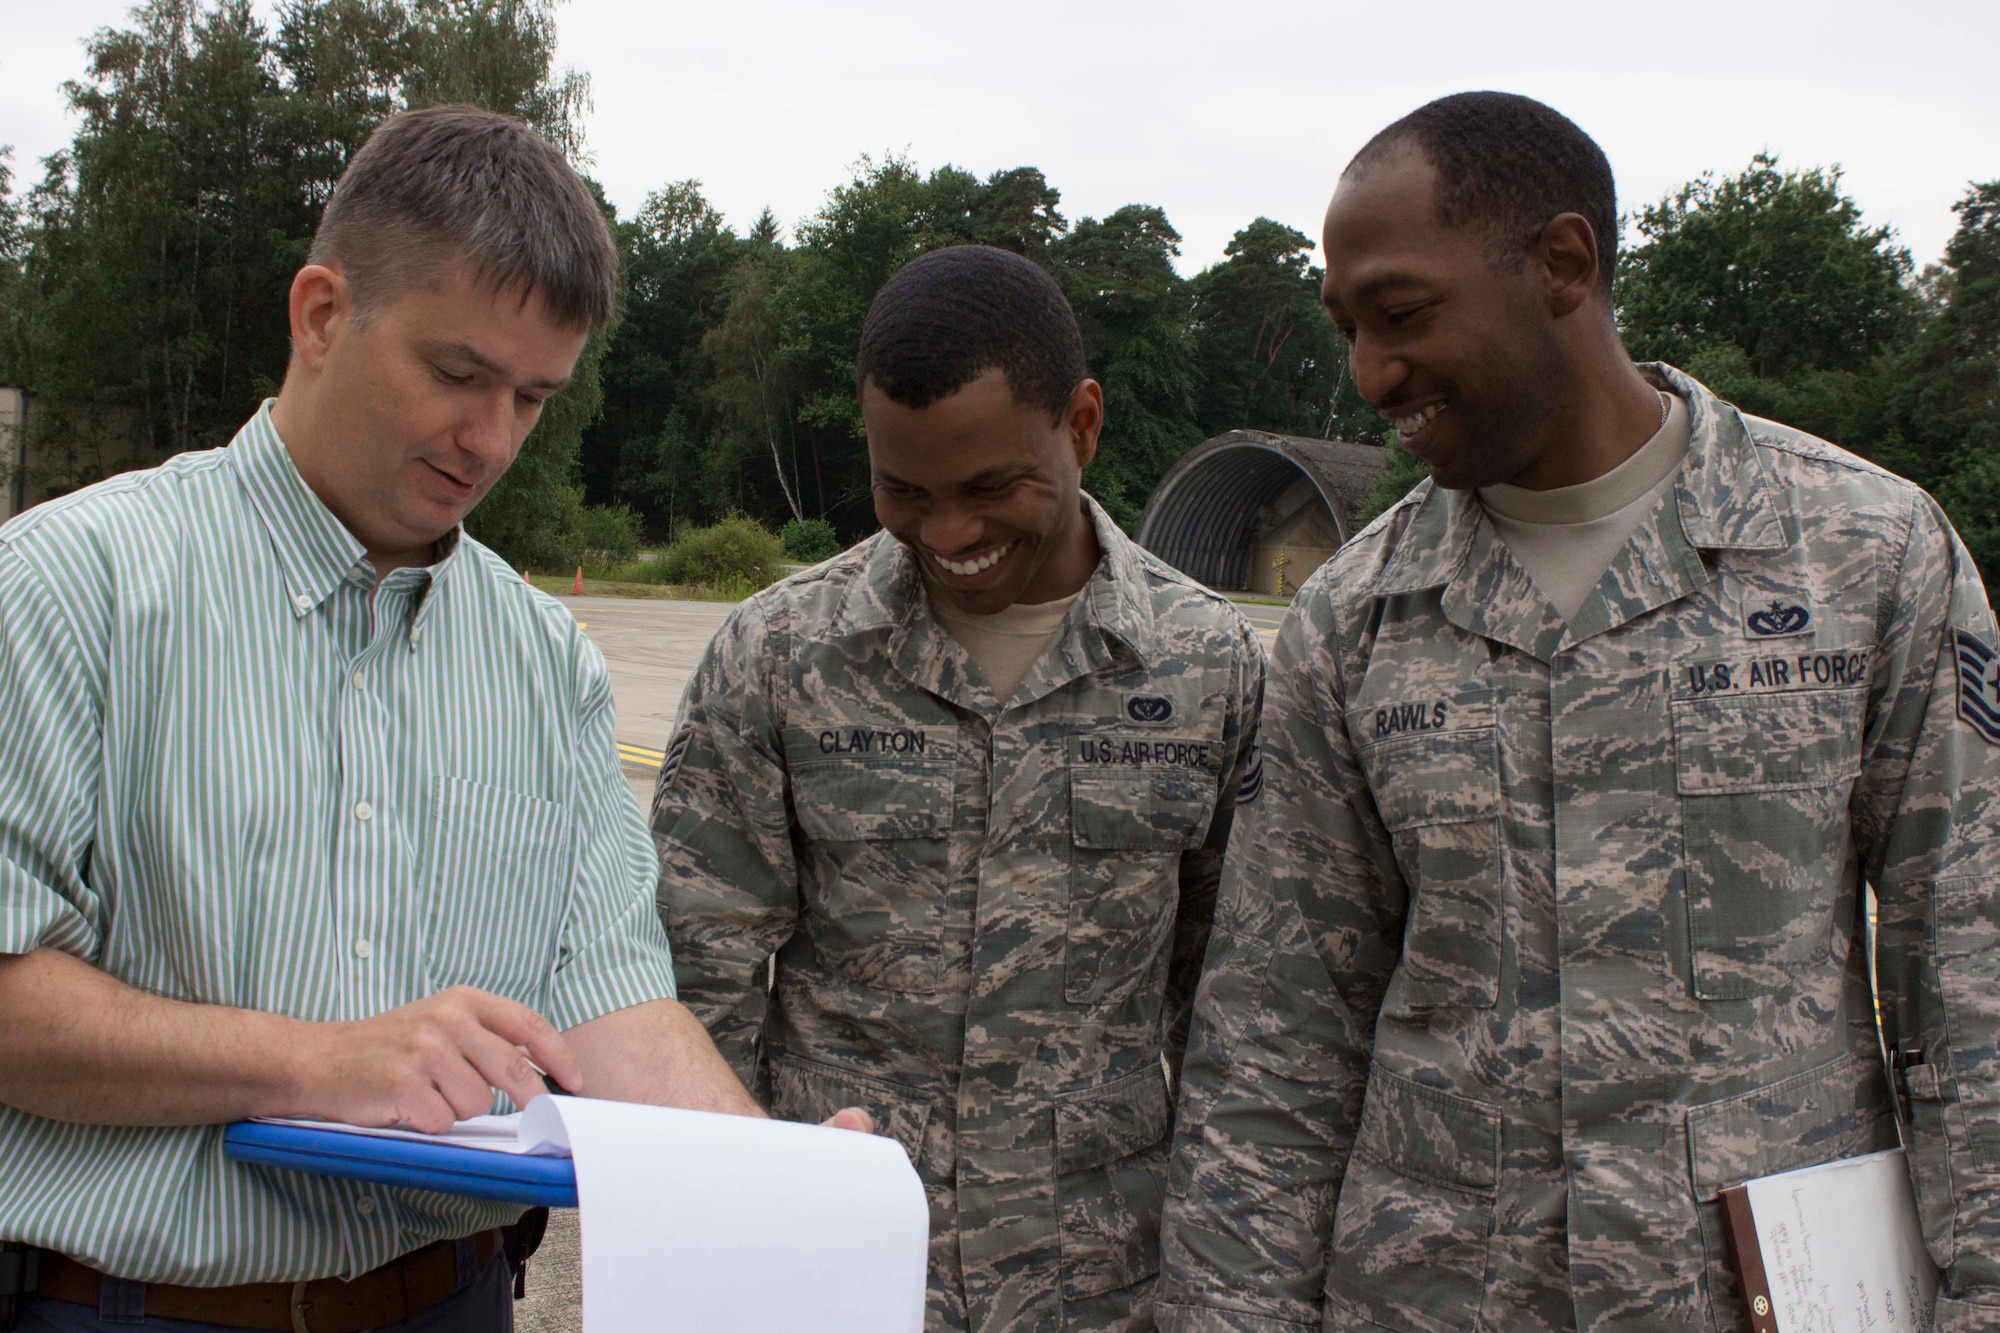 From left, Blaine Benson, Staff Sgt. Terry Clayton and Tech. Sgt. Quentin Rawls discuss facility drawings prior to evaluating a building at Ramstein Air Base, Germany. Benson is a member of the AFCEC asset visibility team who recently travelled to Ramstein to train, validate and calibrate the facility condition assessments at the base. (U.S. Air Force Photo/Susan Lawson)

